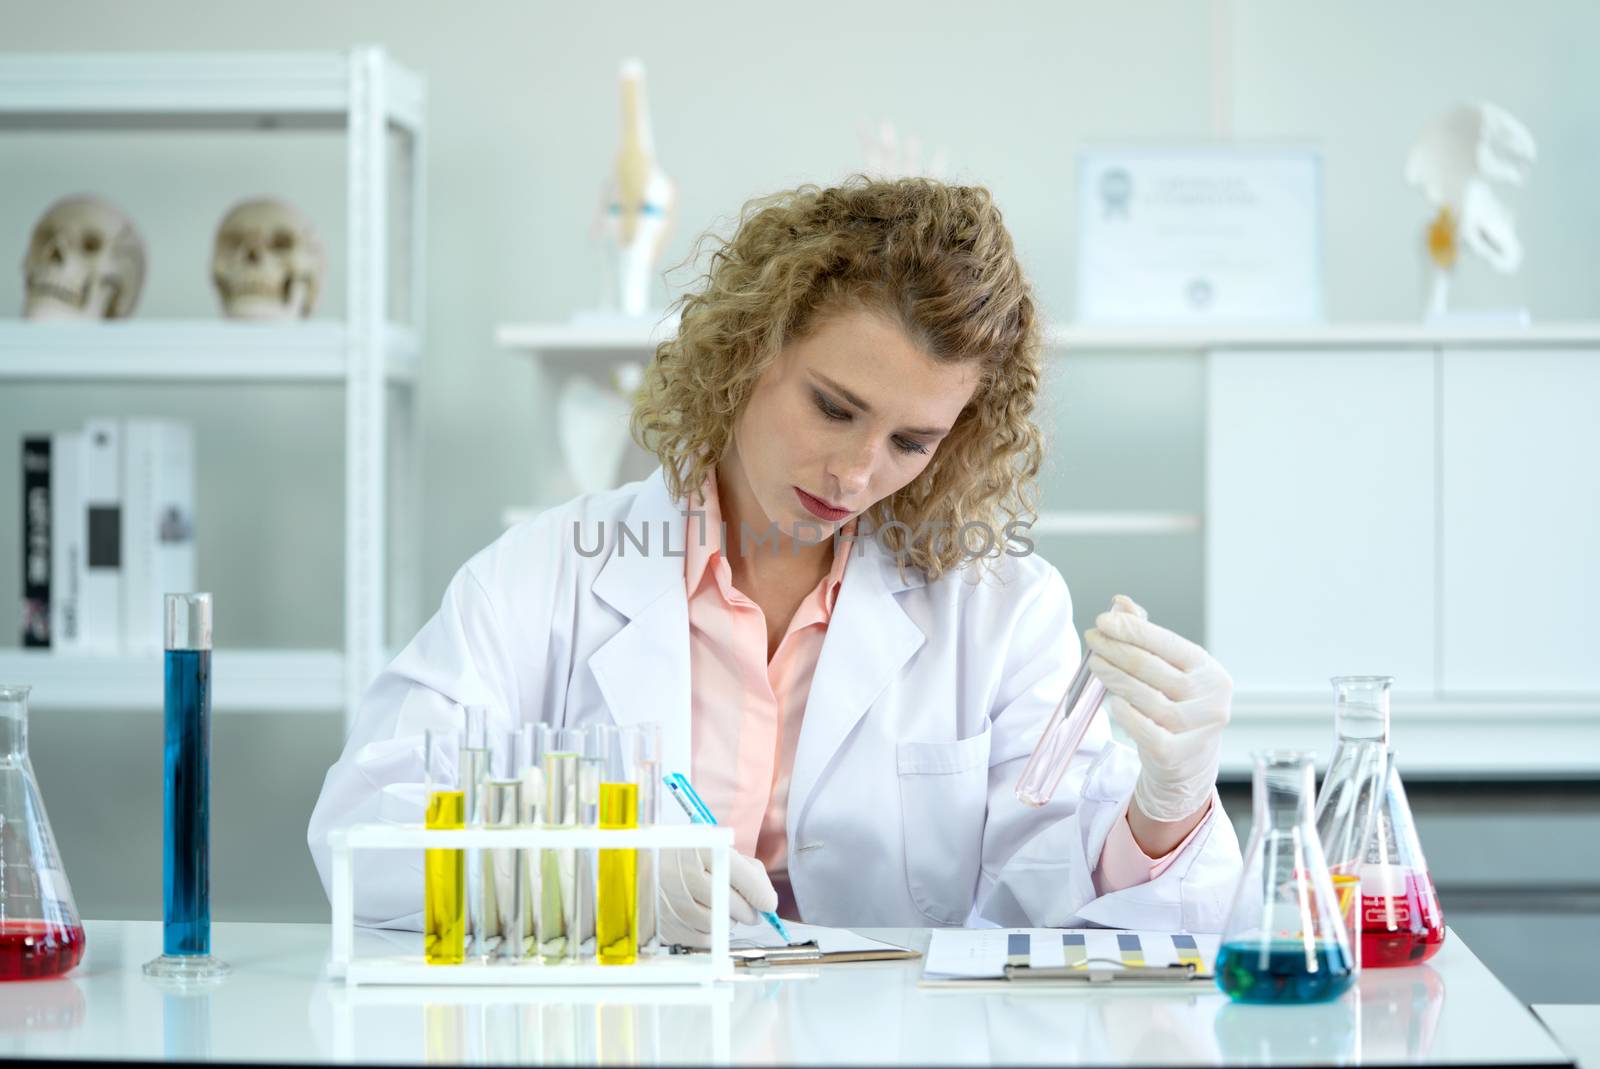 The young blonde scientist is writing down the result of new chemical research into the experiment chart. Working atmosphere in chemical laboratory. Test tubes filled with chemicals on the table.